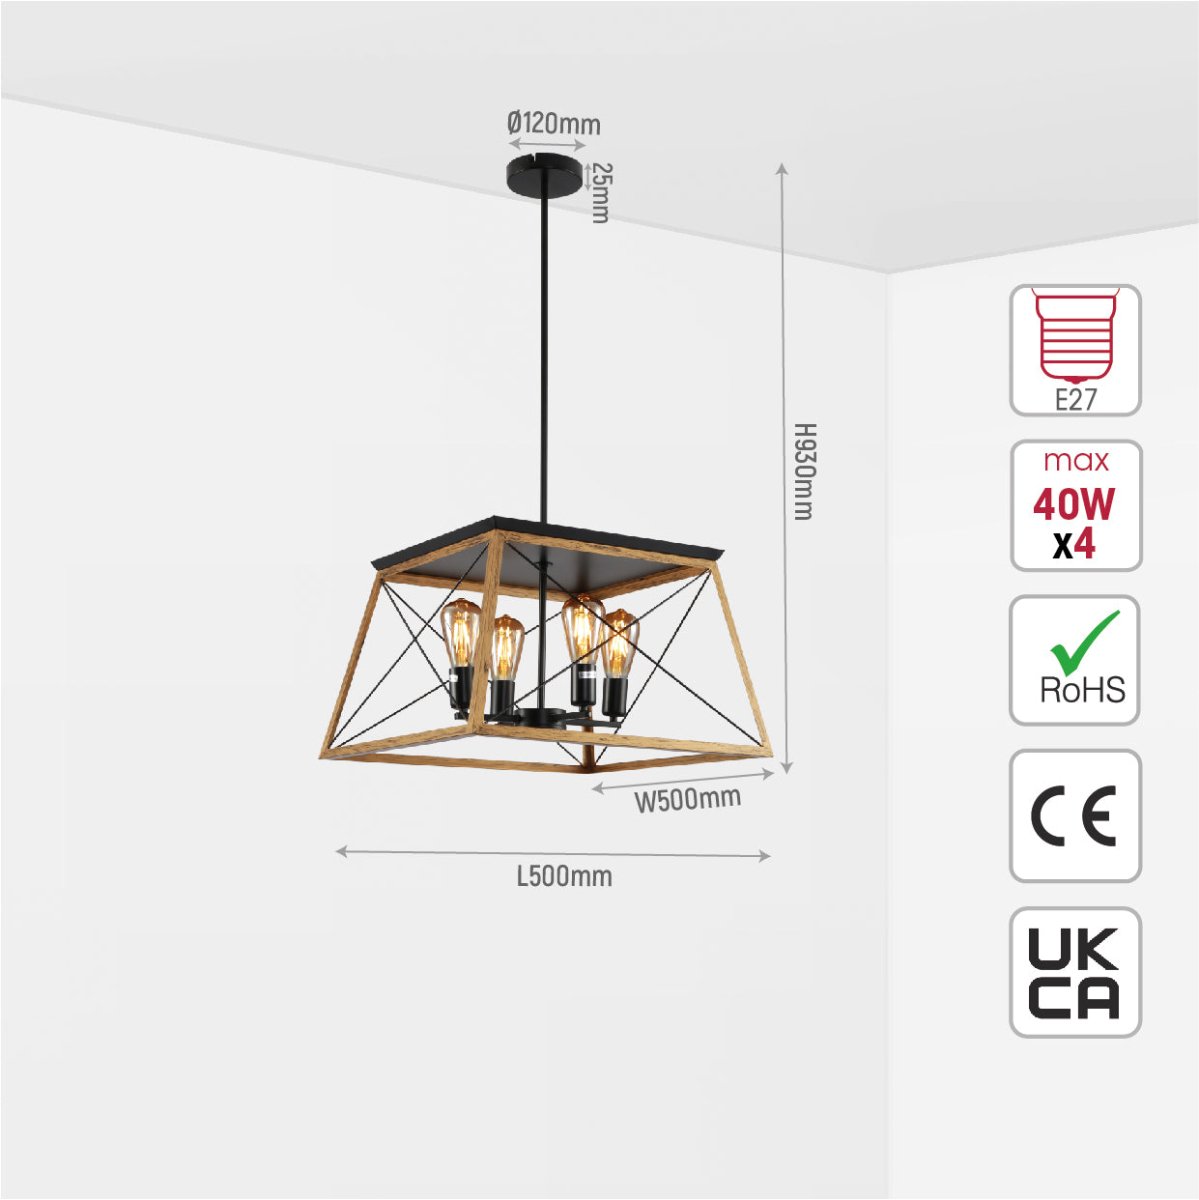 Size and specs of Caged Candle Industrial Kitchen Island Retro Square Pendant Ceiling Light with 4xE27 Gold Black Finishing | TEKLED 159-17870